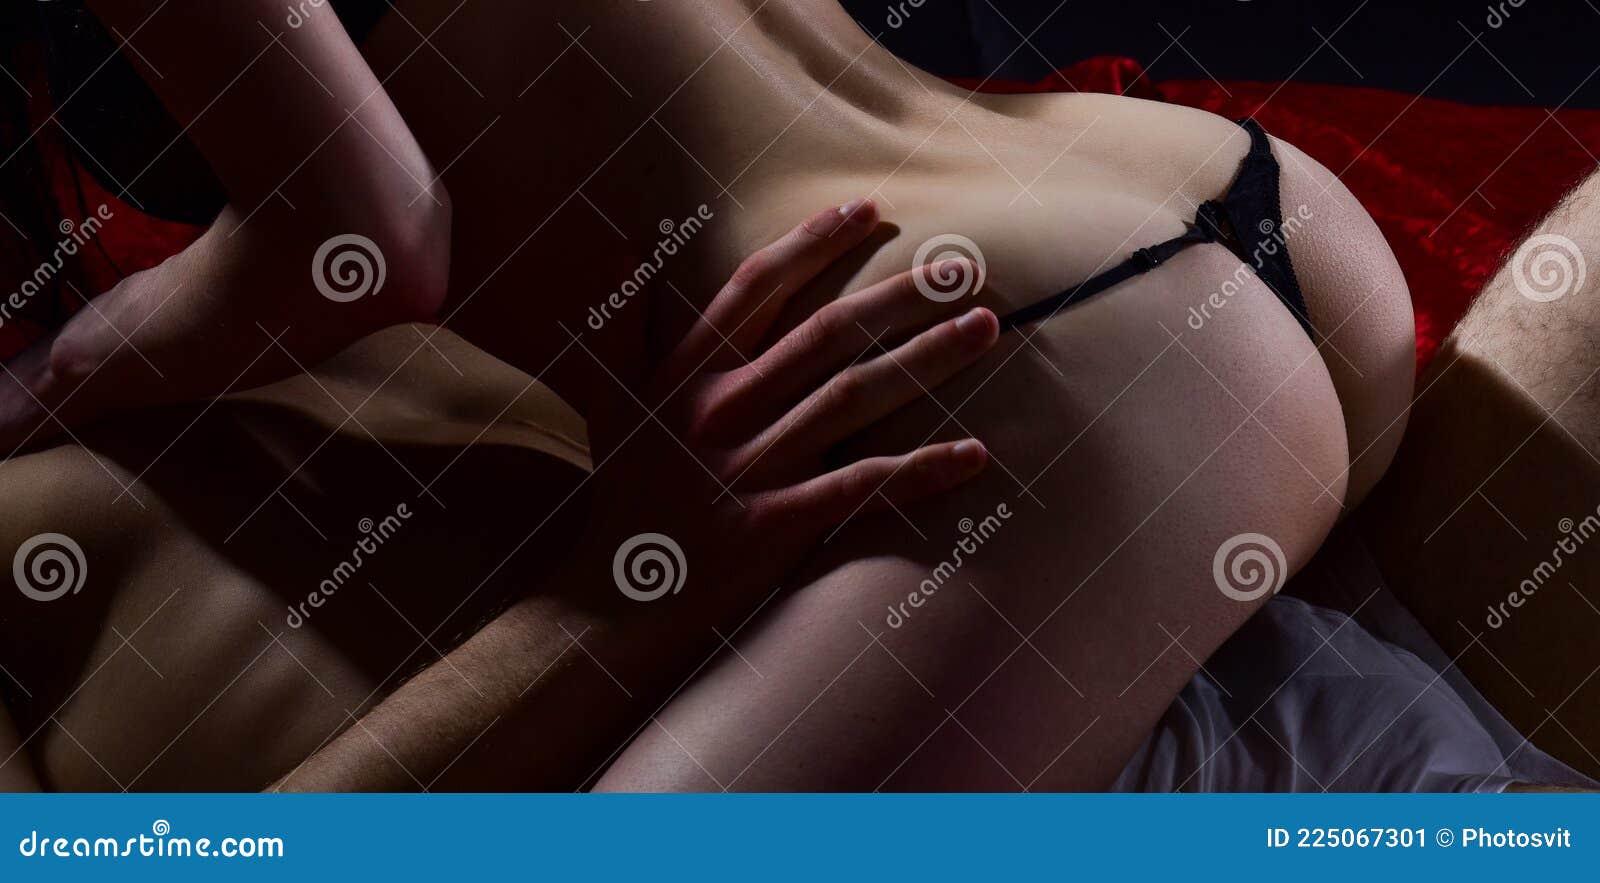 Sensual Couple in Love of Girlfriend and Boyfriend Lovers Having Sex Foreplay with Undressed Body, Enticement Stock Image image